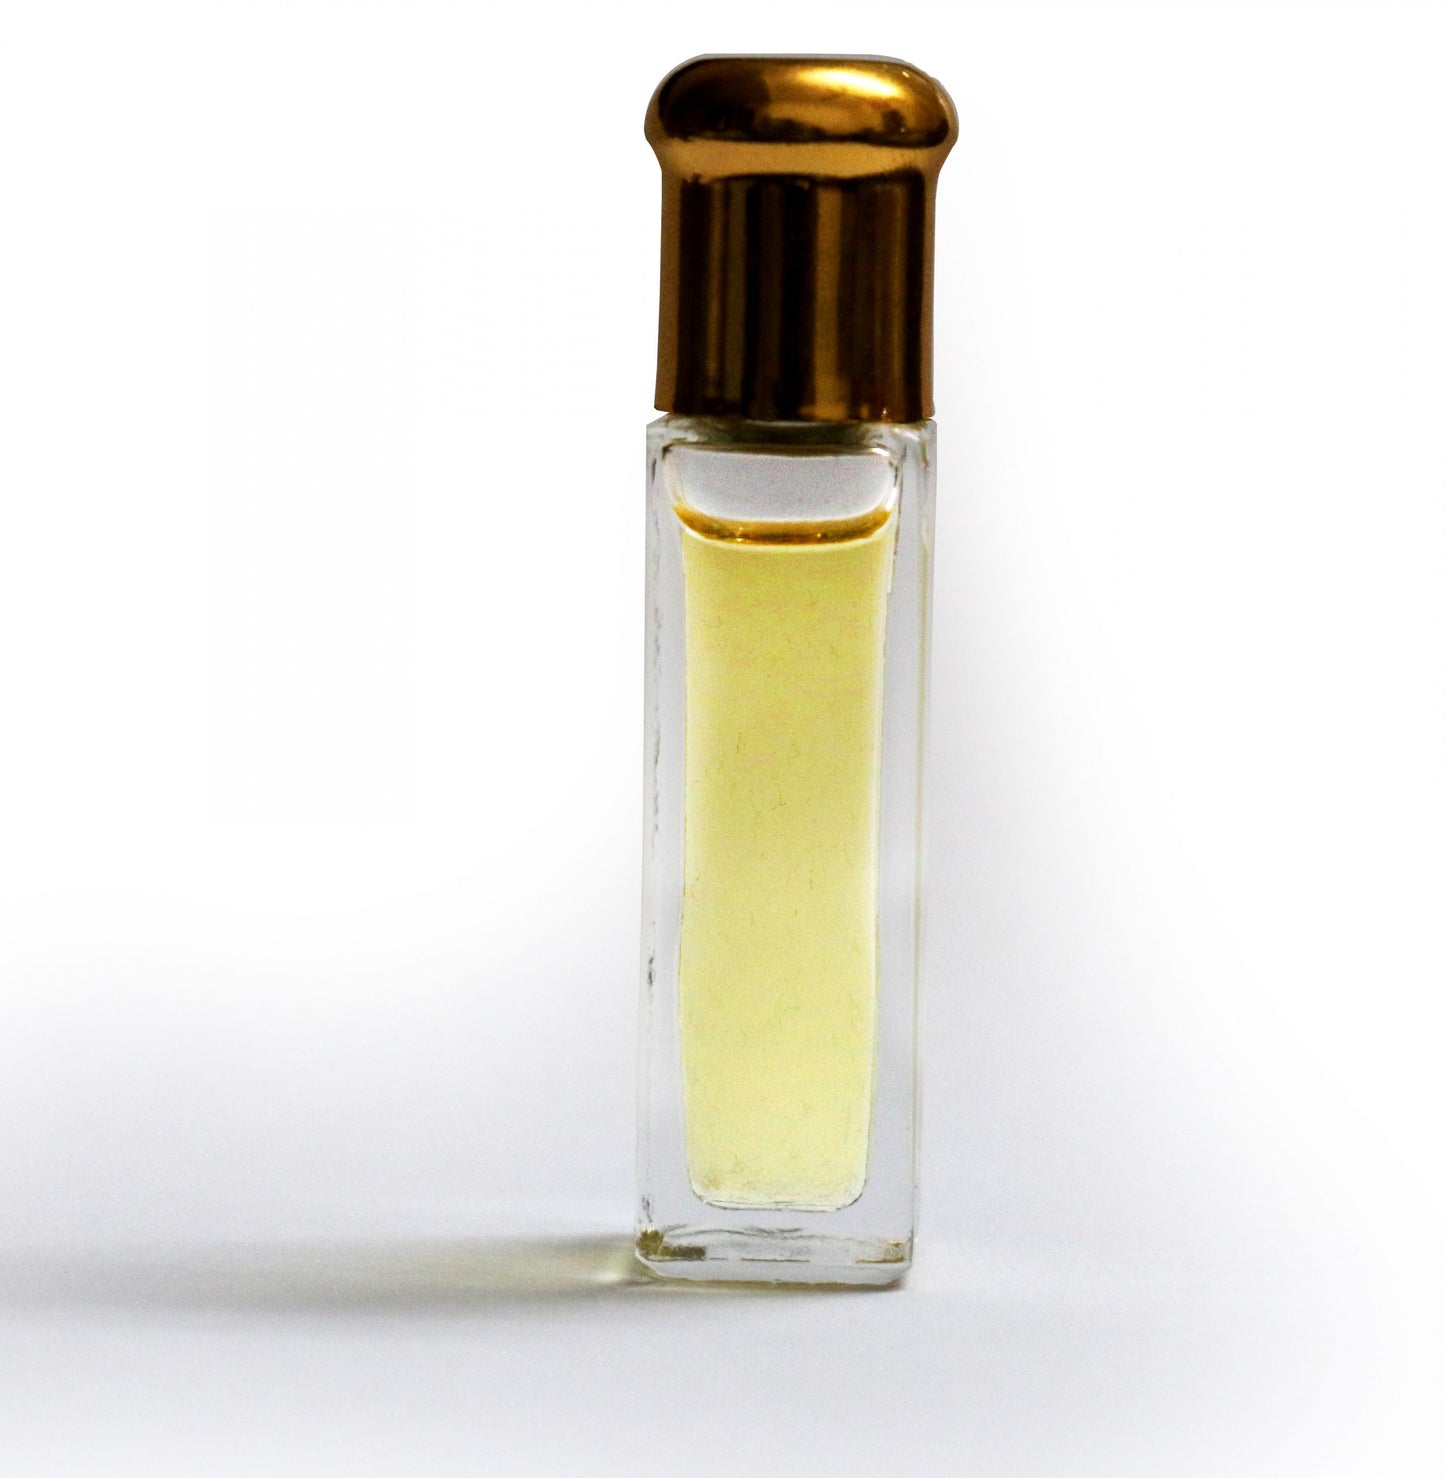 "MOGRA" PURE NATURAL ATTAR  FRAGRANCE ONLY TO BE SOLD IN INDIA